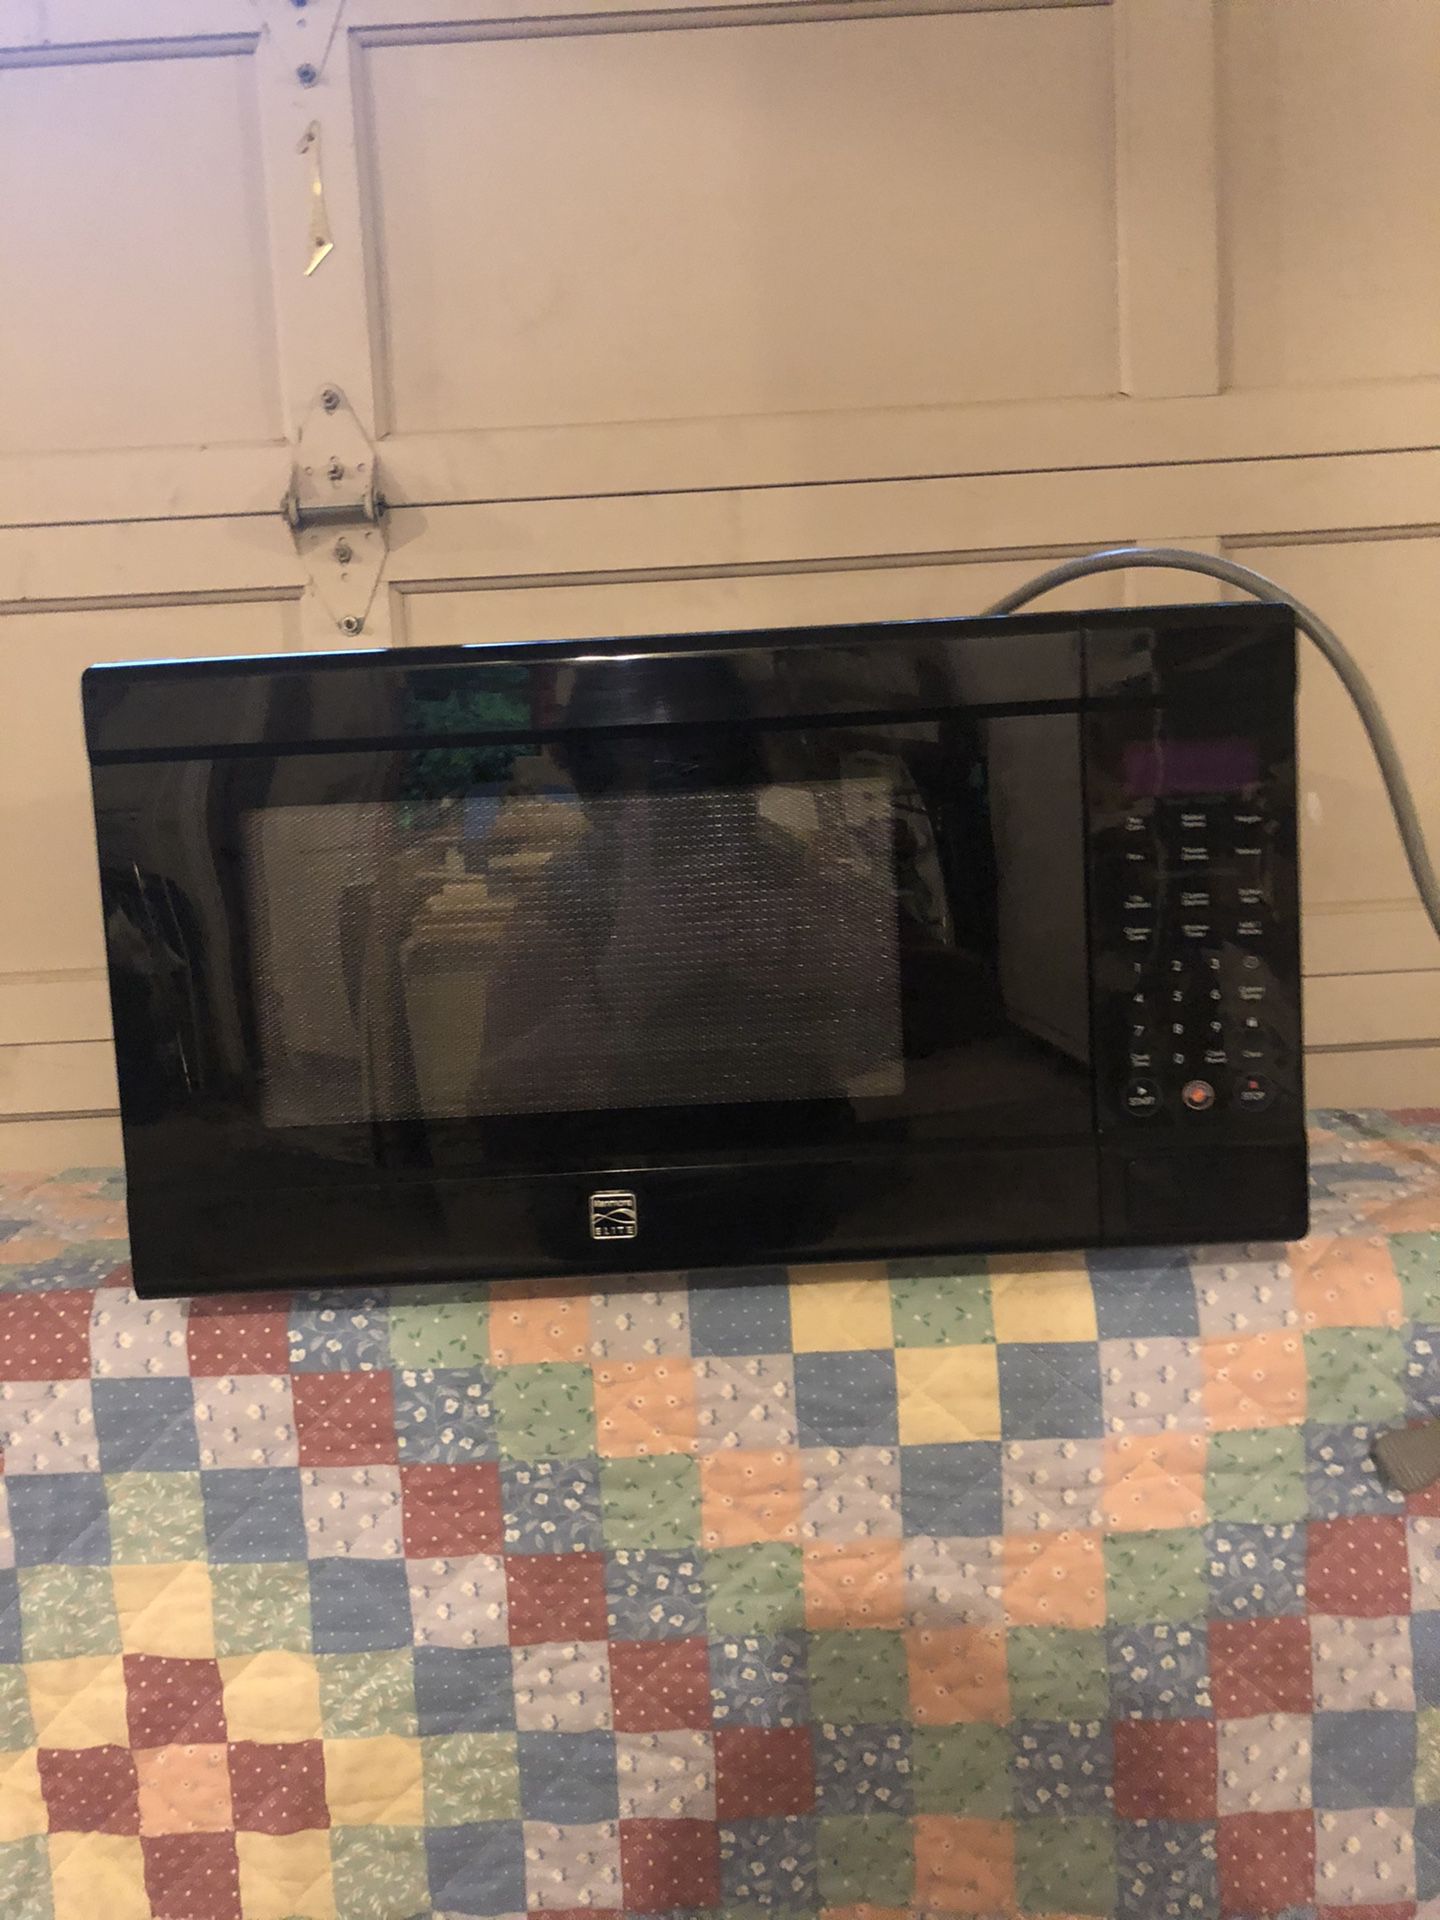 Black Microwave Oven